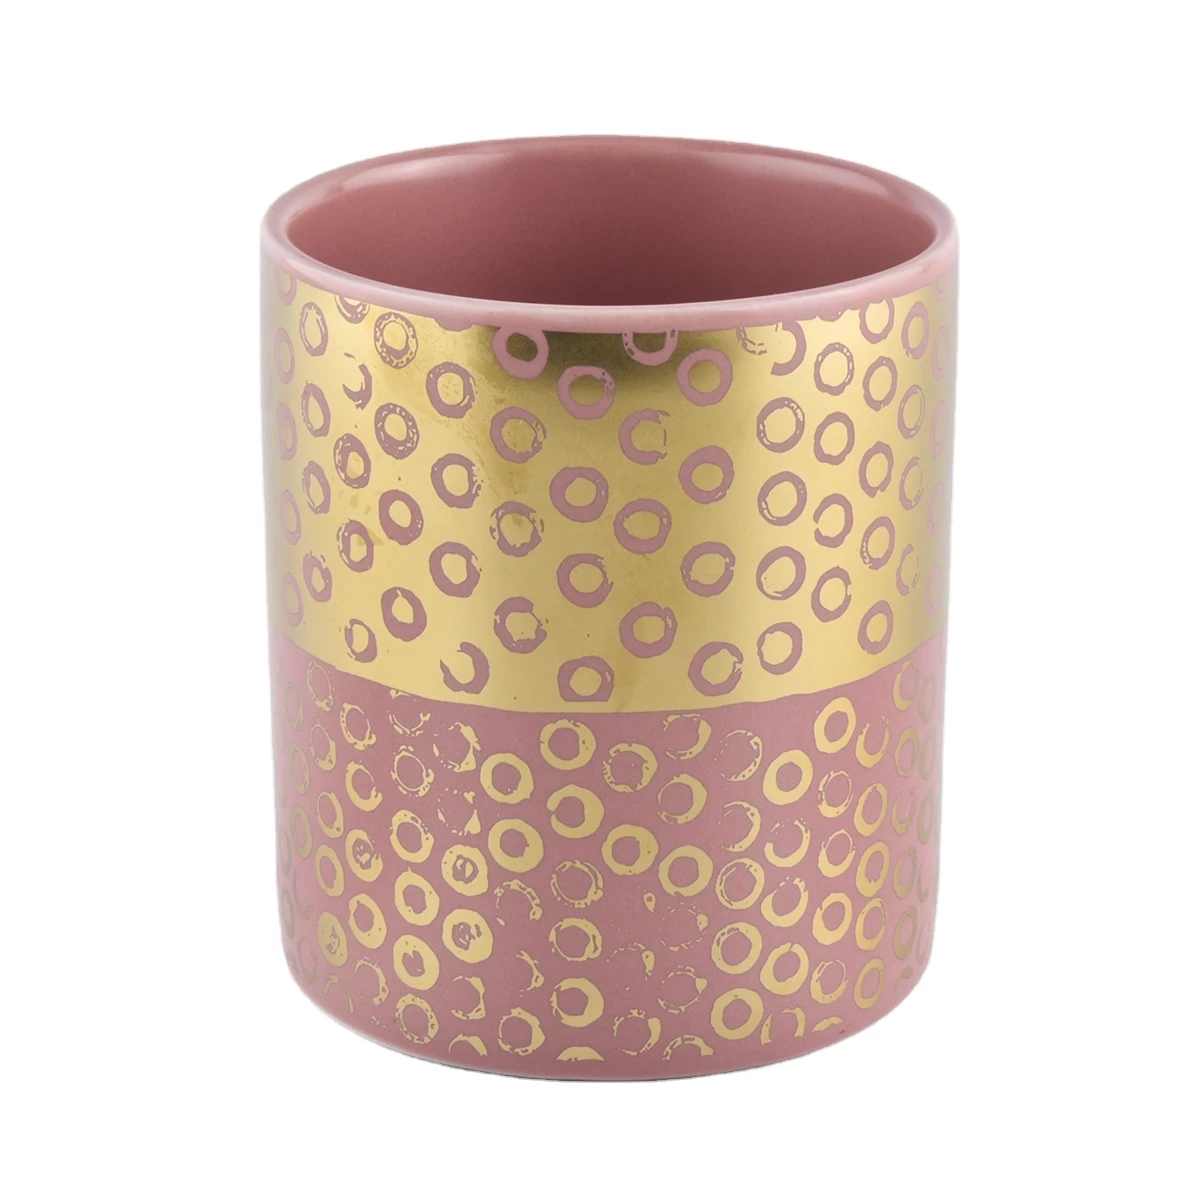 In bulk luxury pink ceramic candle holders with gold printing